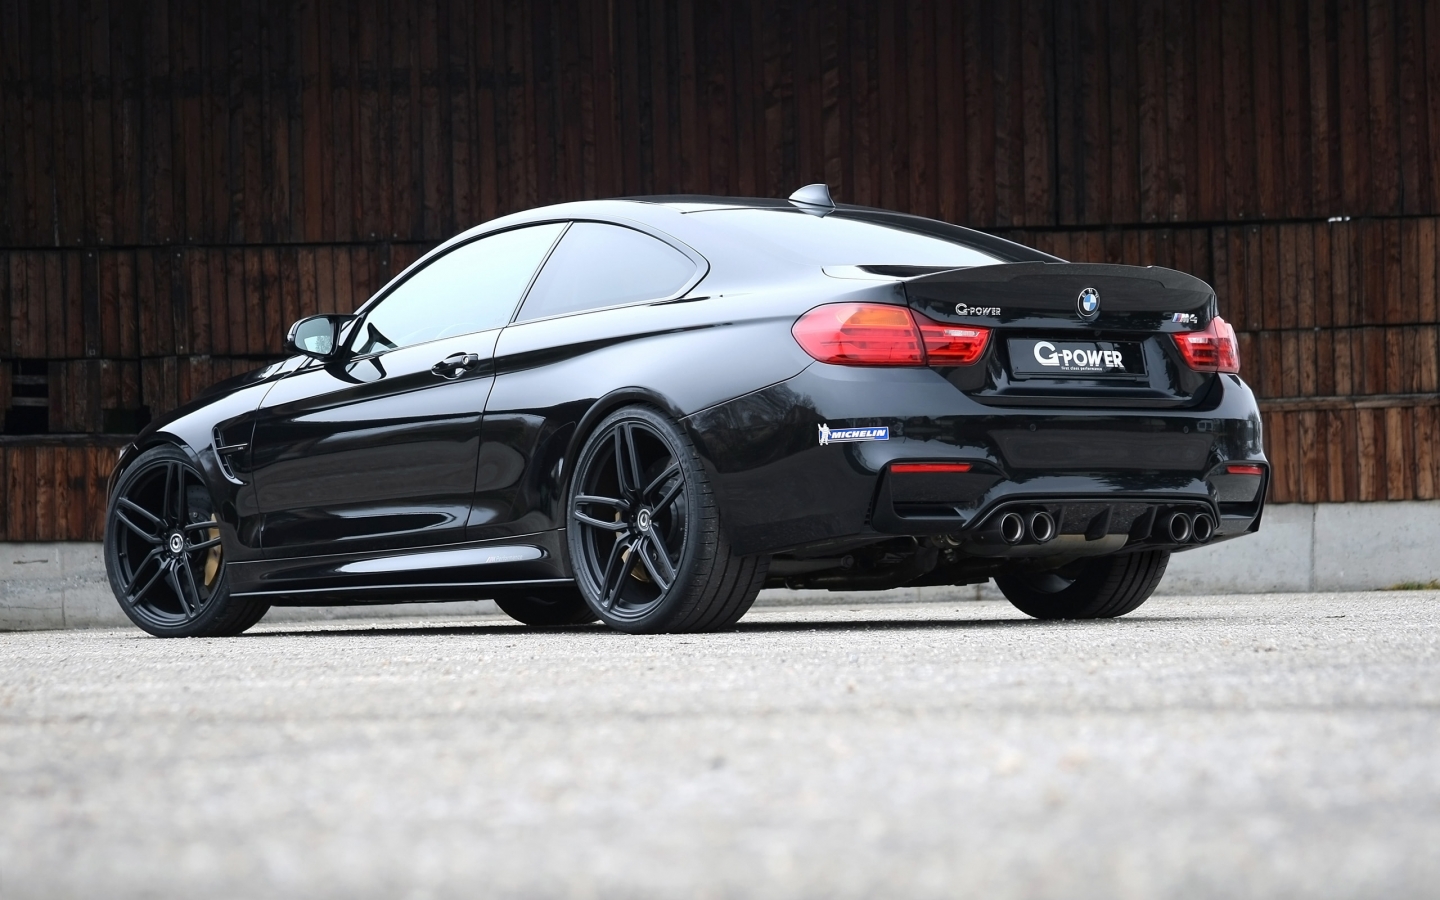 Black BMW M4 G-Power 2014 Rear for 1440 x 900 widescreen resolution